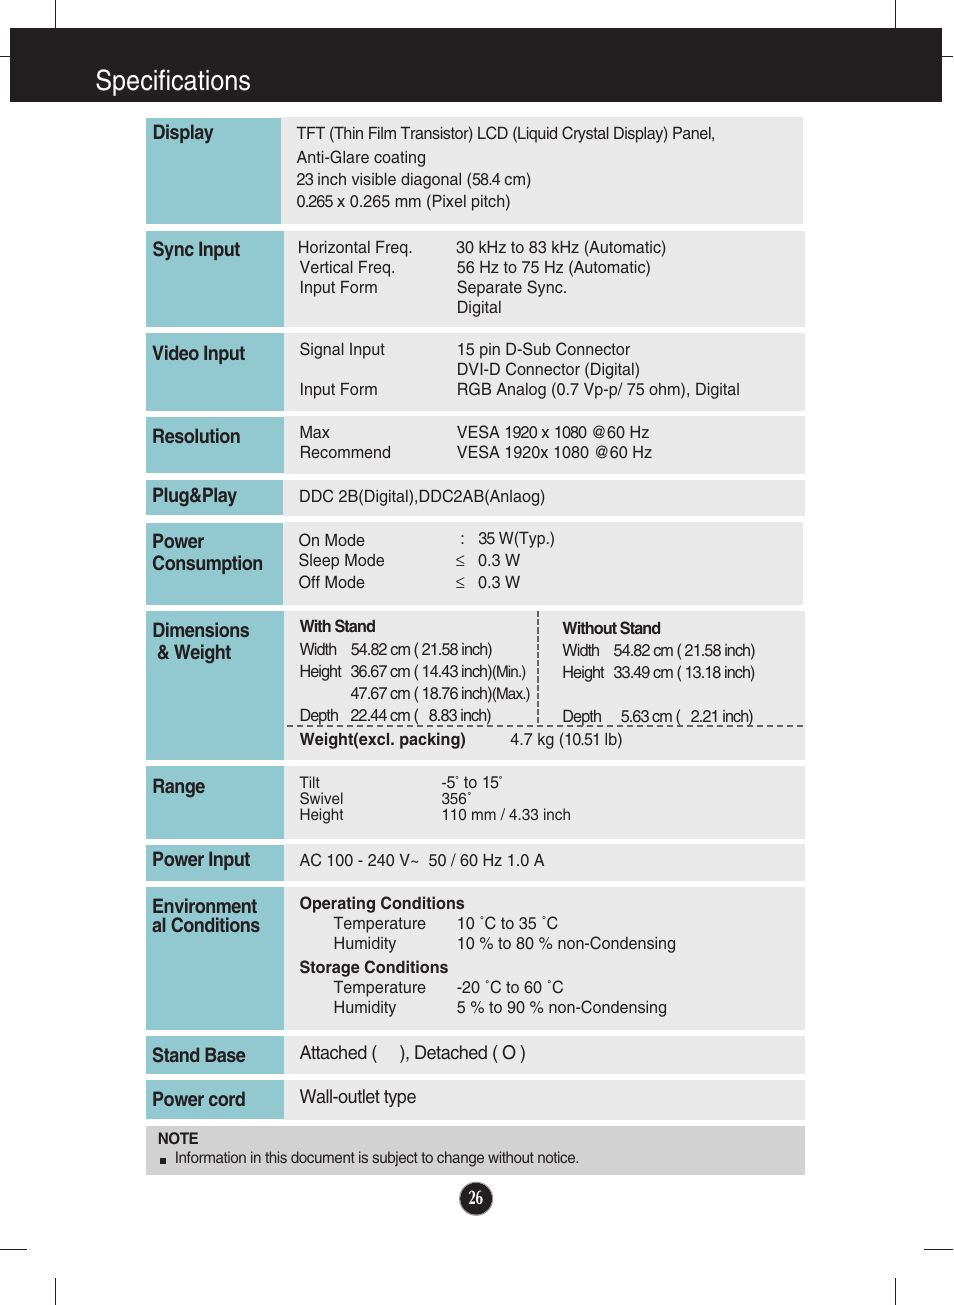 Specifications | LG IPS231B-BN User Manual | Page 27 / 31